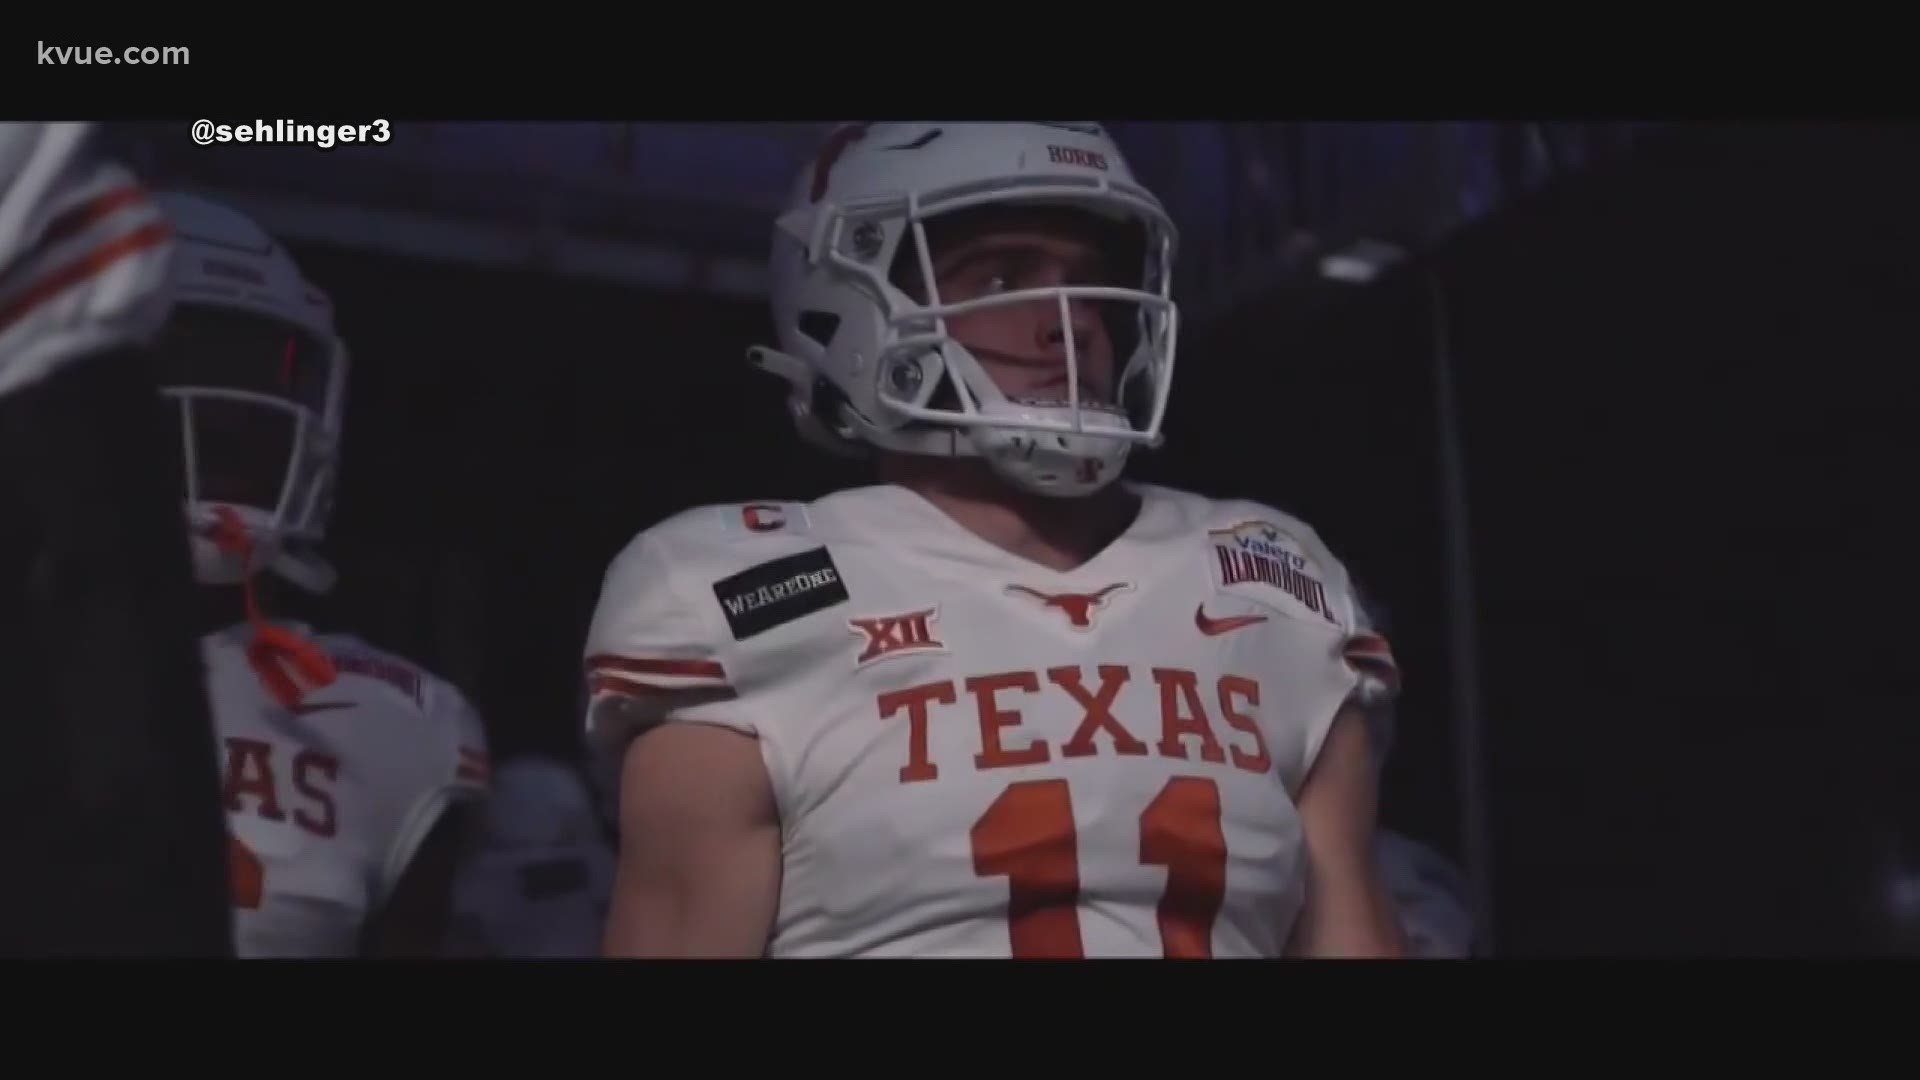 Sam Ehlinger announced on Jan. 3 that he will enter the NFL Draft. About a month ago, he discussed what he hopes will be his legacy at Texas.